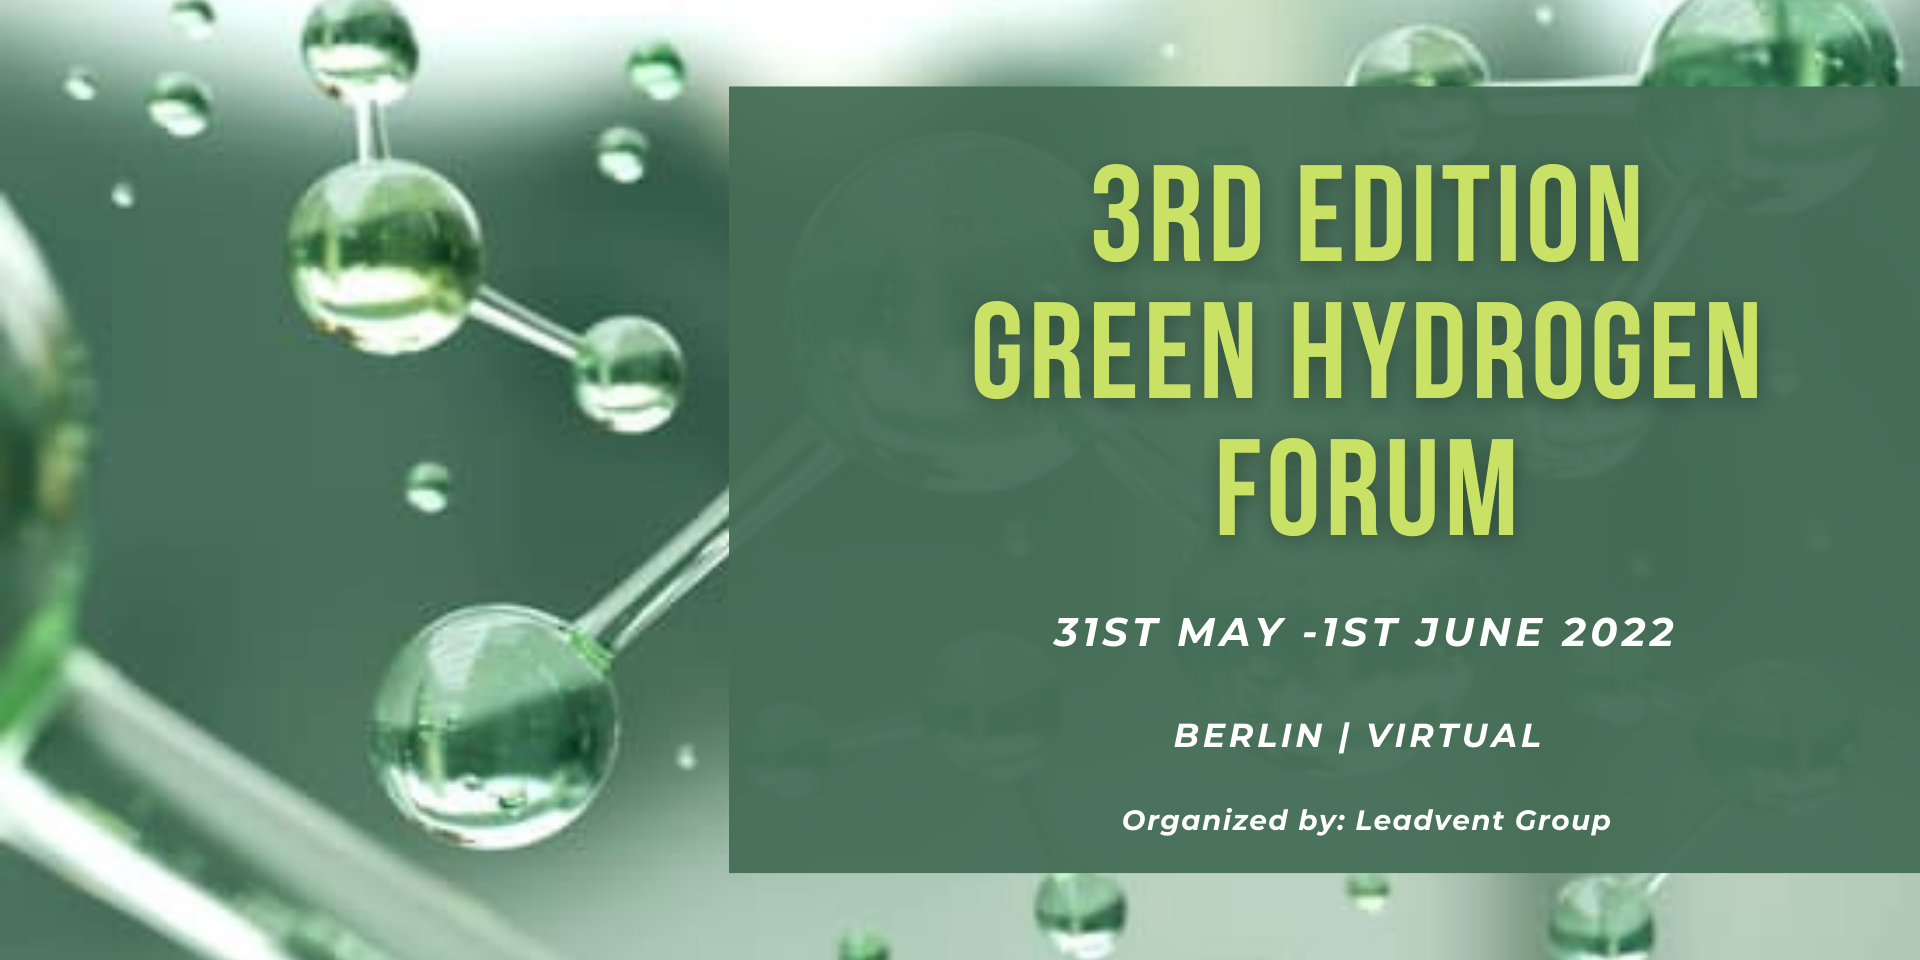 3rd Edition Green Hydrogen Forum organized by Leadvent Group